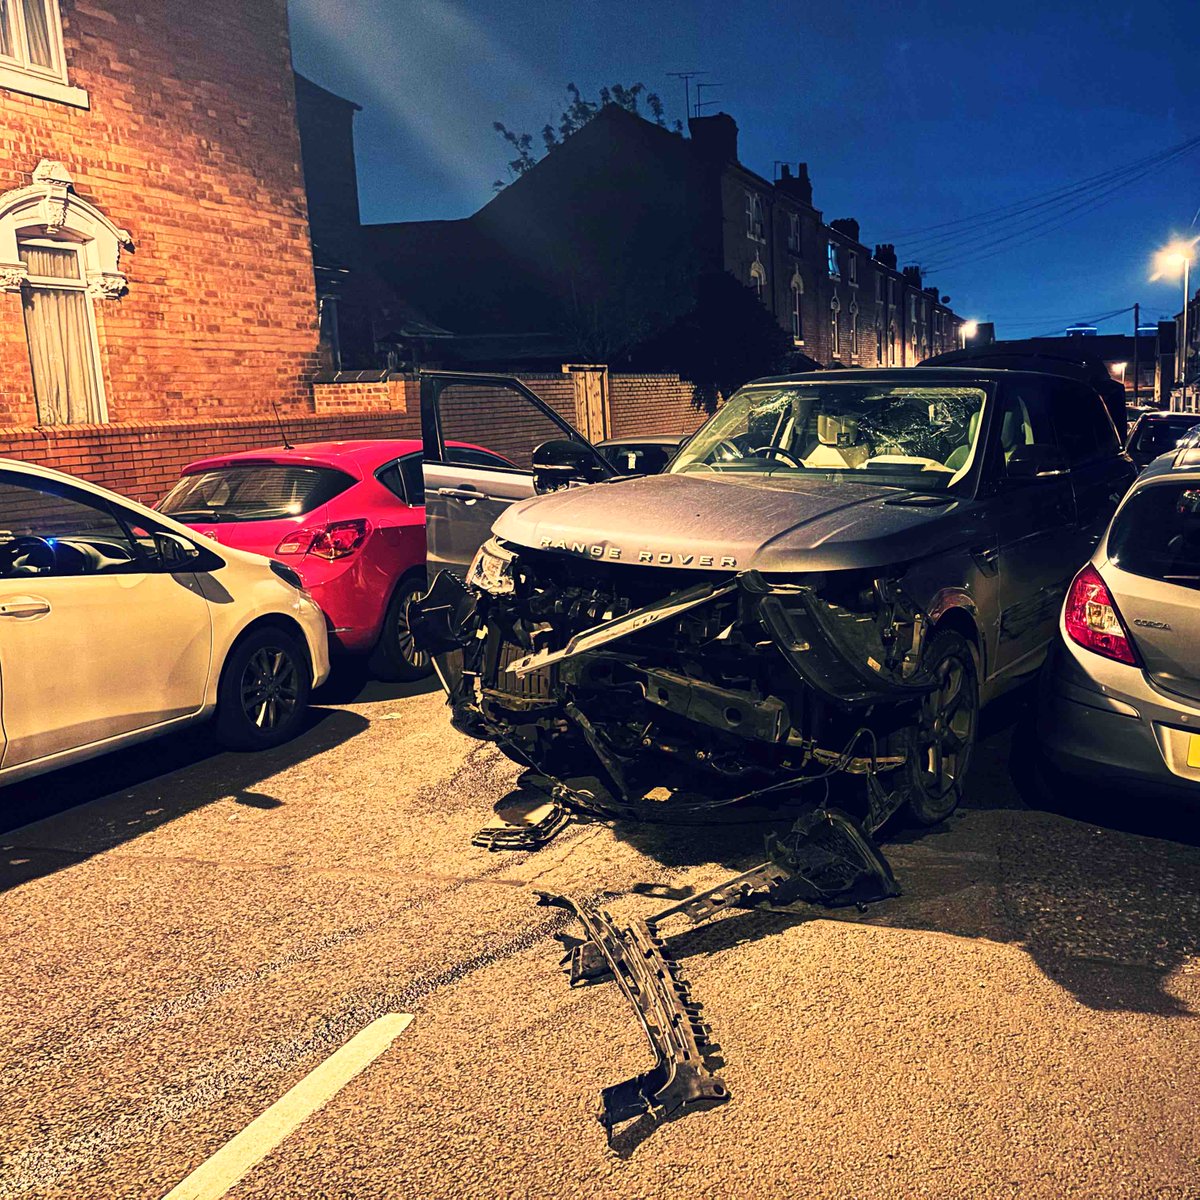 #RoadCrimeTeam on patrol in #WinsonGreen found a stolen Range Rover, stolen in a #Burglary hours earlier in #Redditch. The vehicle was pursued and crashed before the driver fled. 🏃💨👮🏻‍♂️ Caught in a nearby street. #1inCustody #DangerousDriver